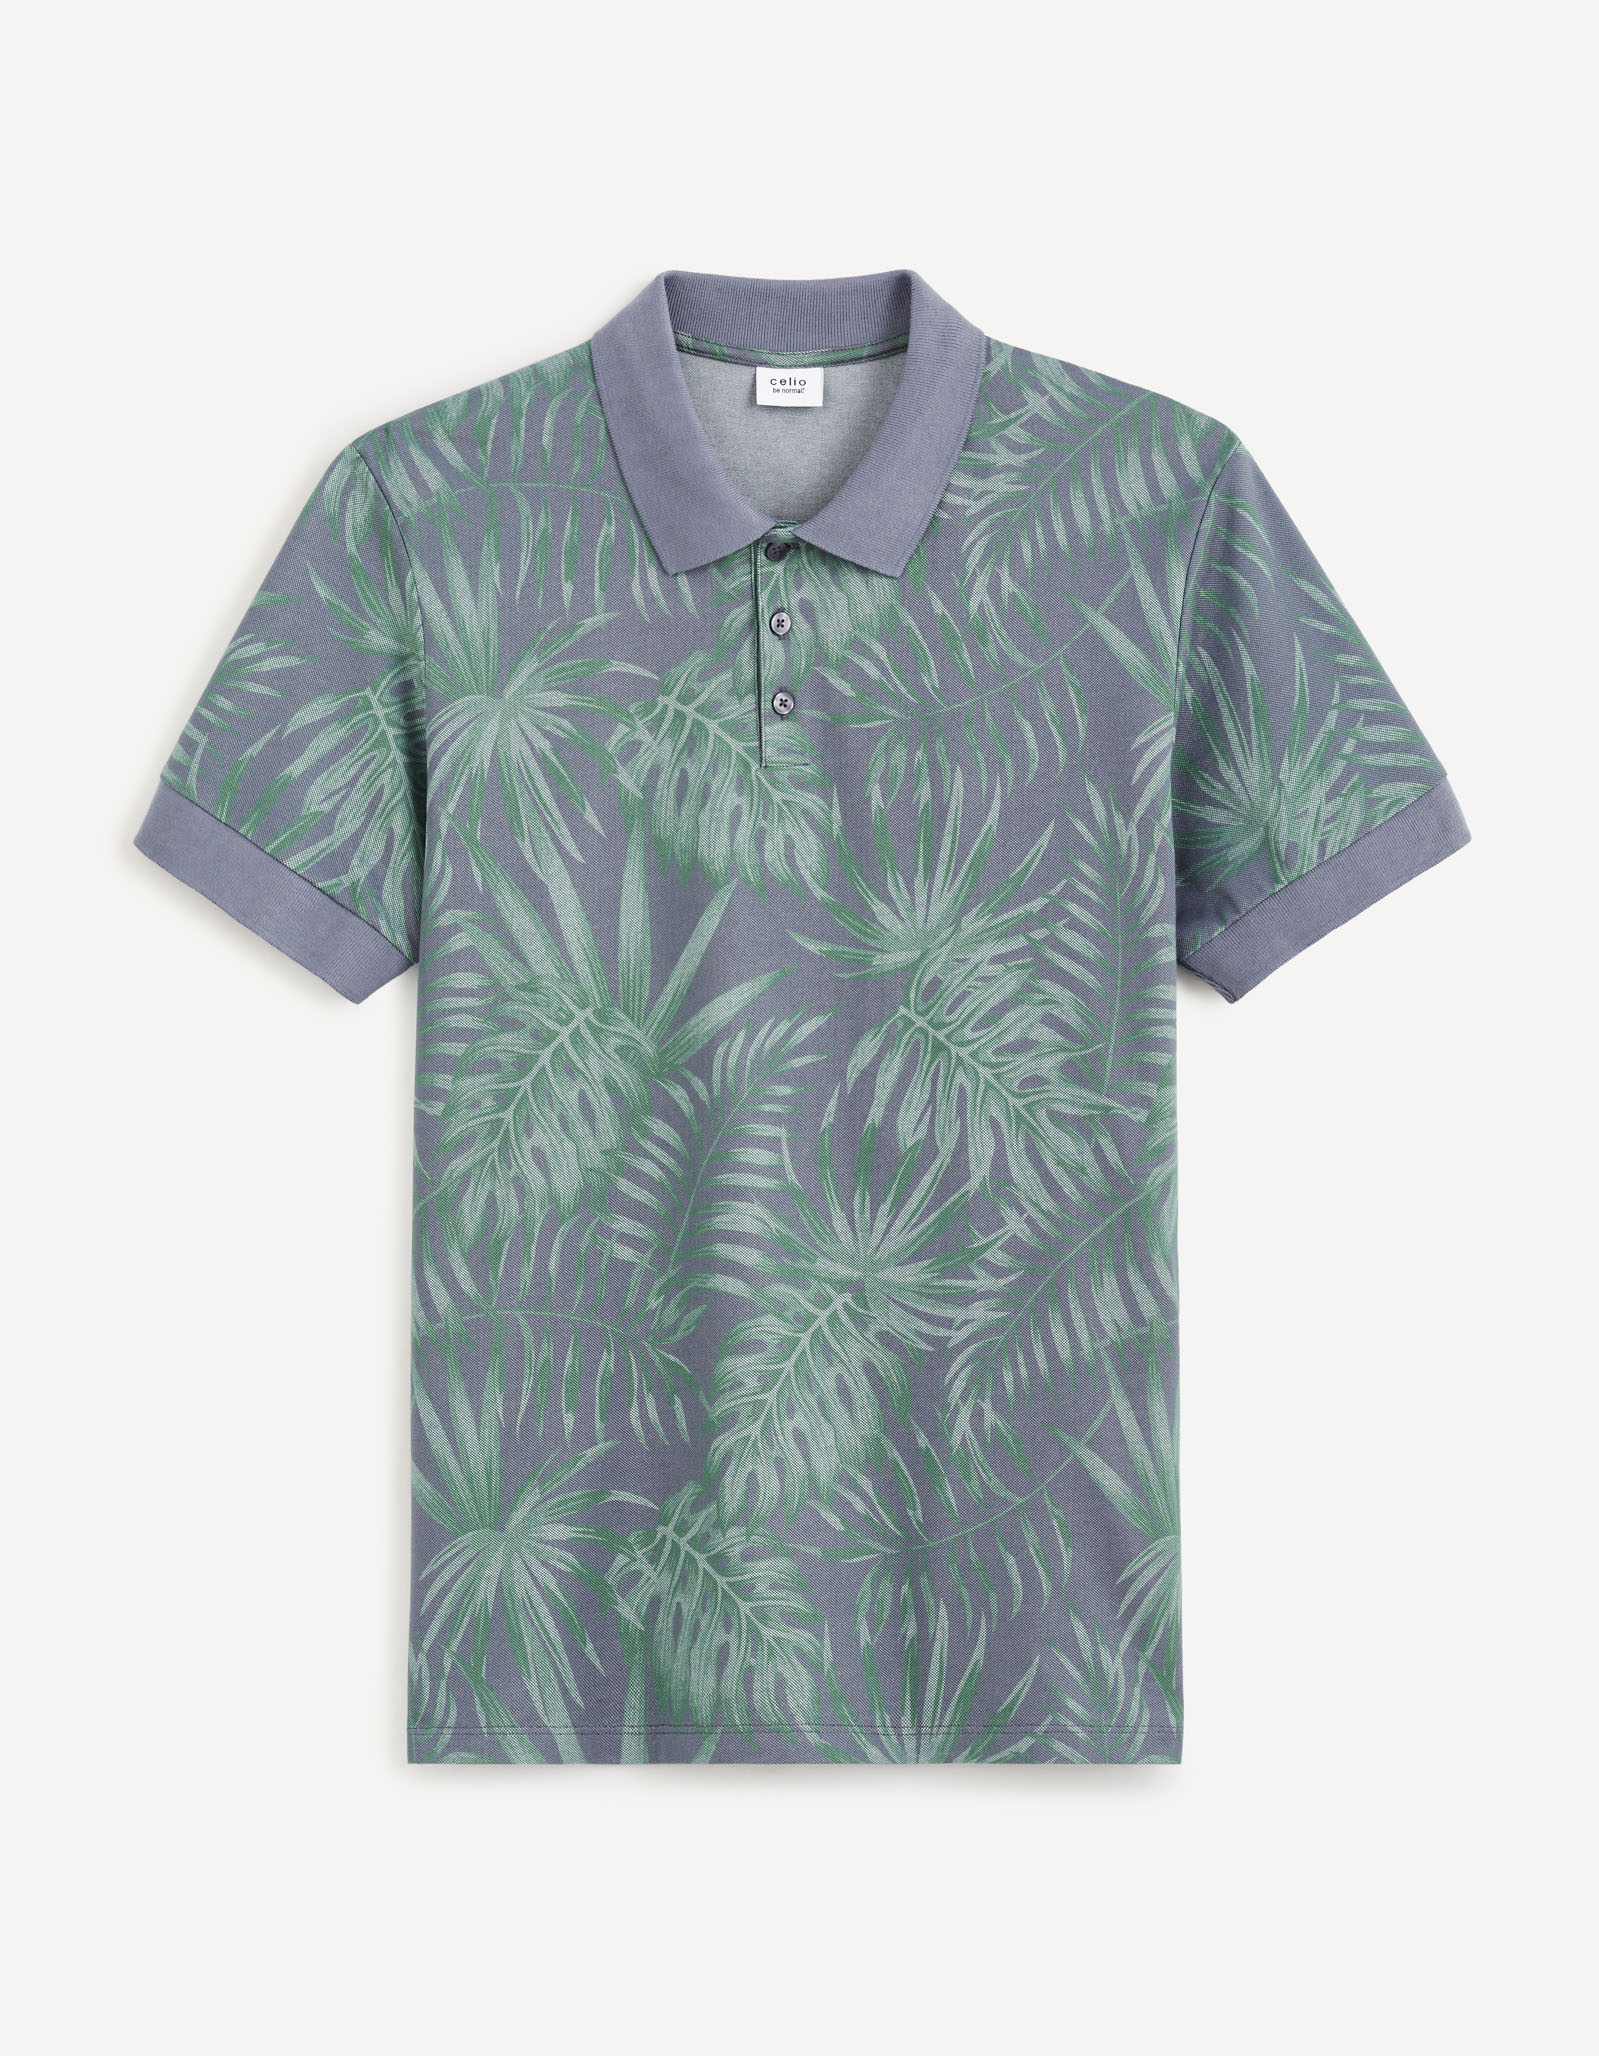 Celio Polo T-shirt Cepalm With Leaves - Men